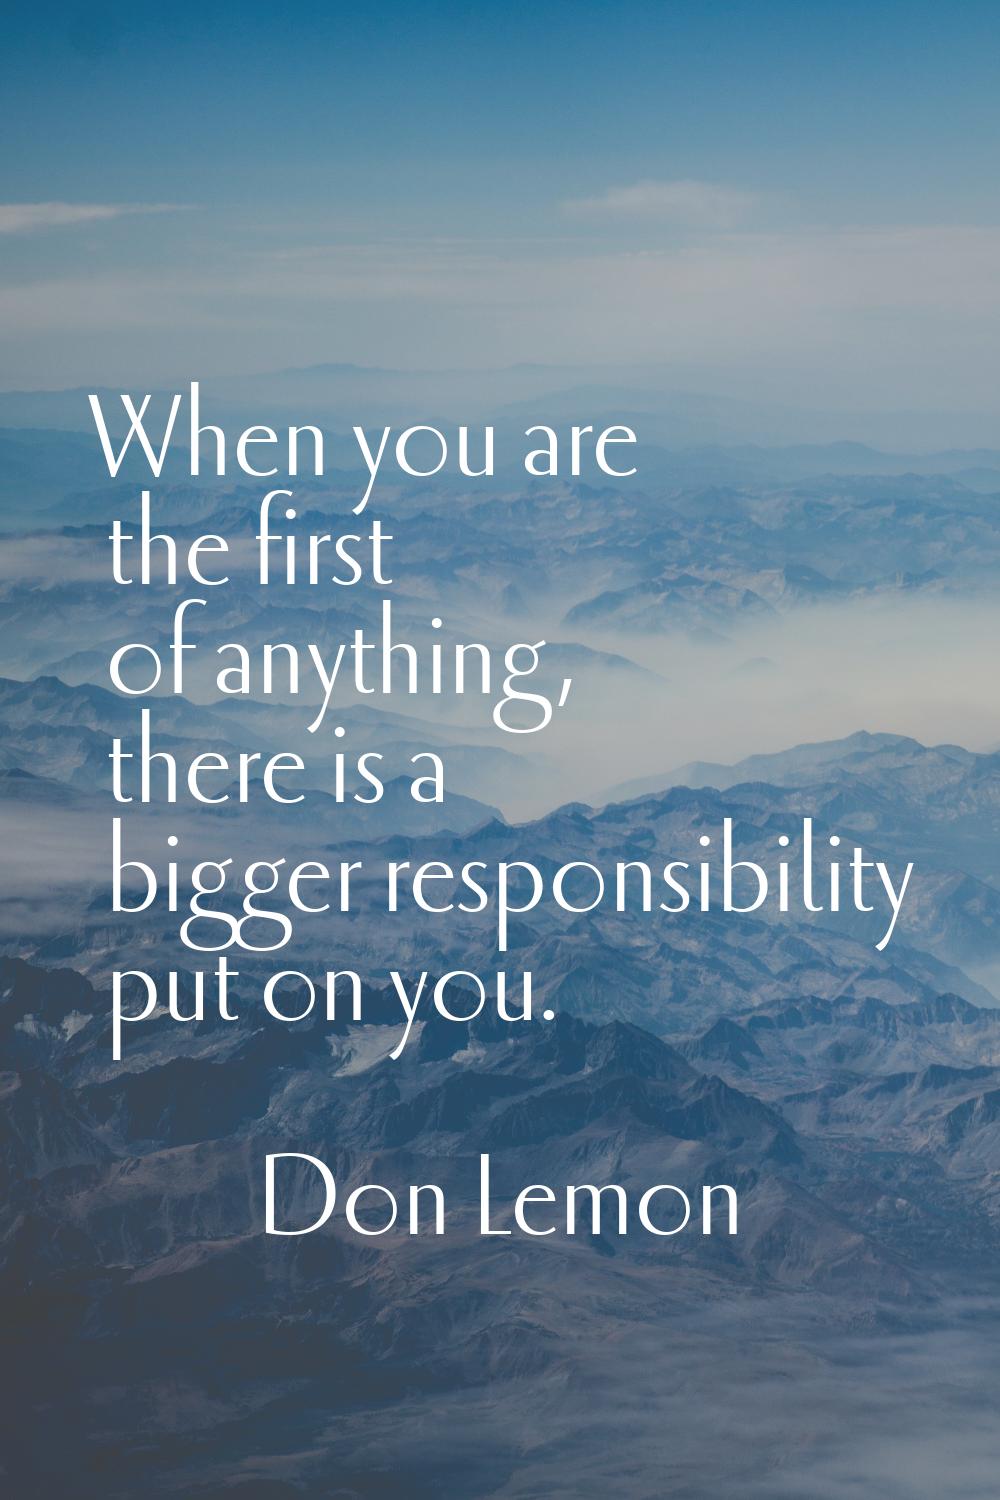 When you are the first of anything, there is a bigger responsibility put on you.